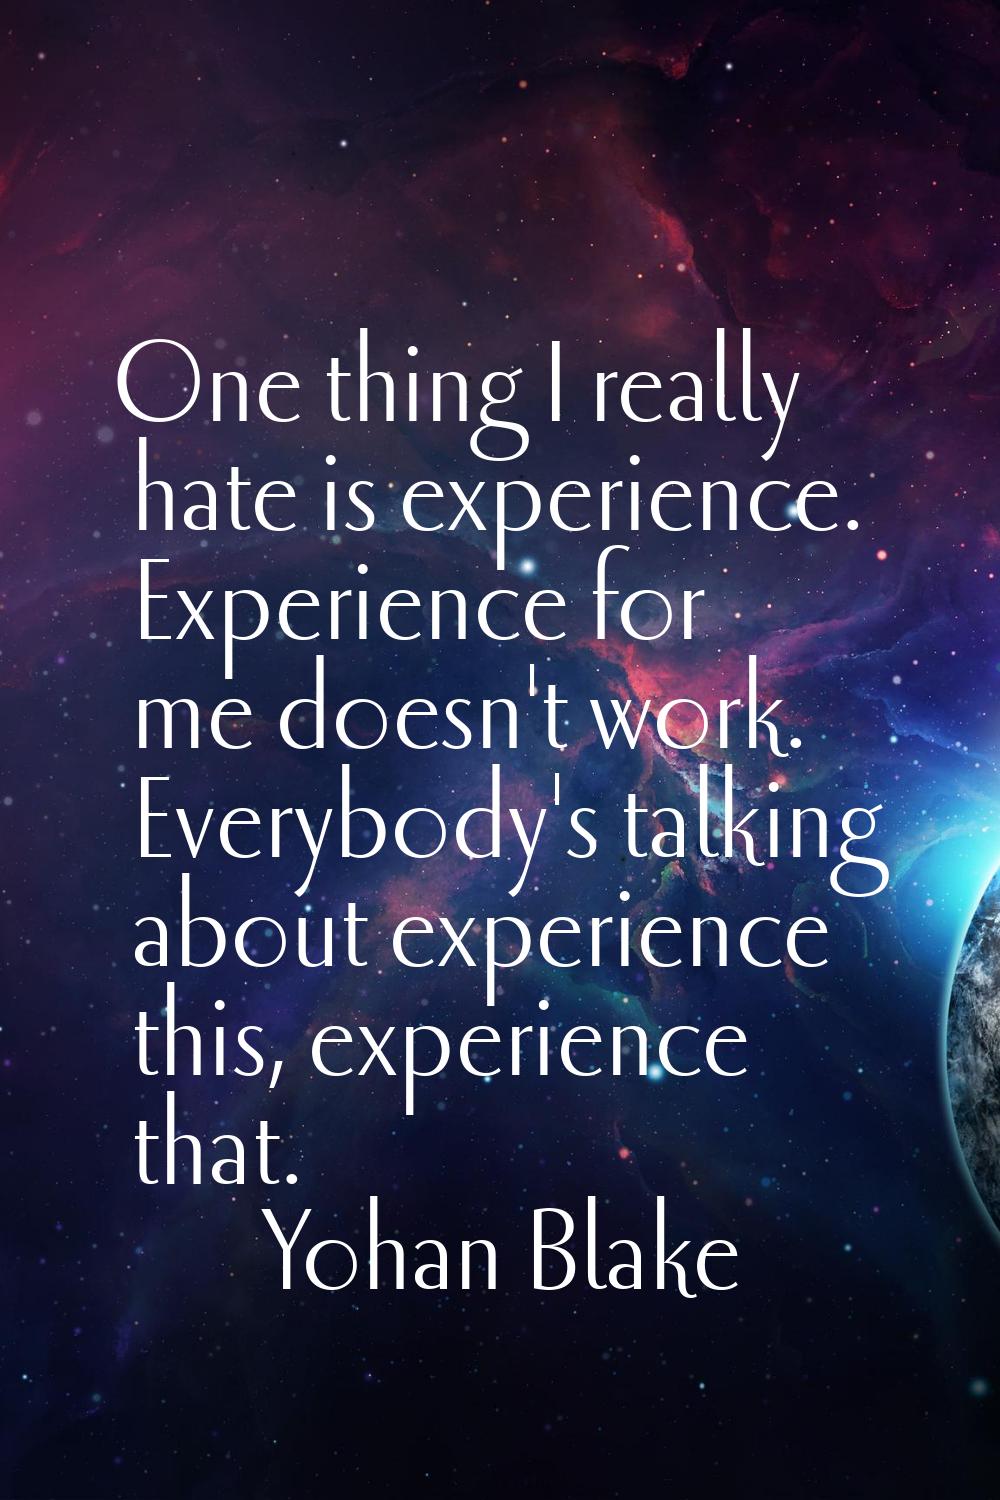 One thing I really hate is experience. Experience for me doesn't work. Everybody's talking about ex